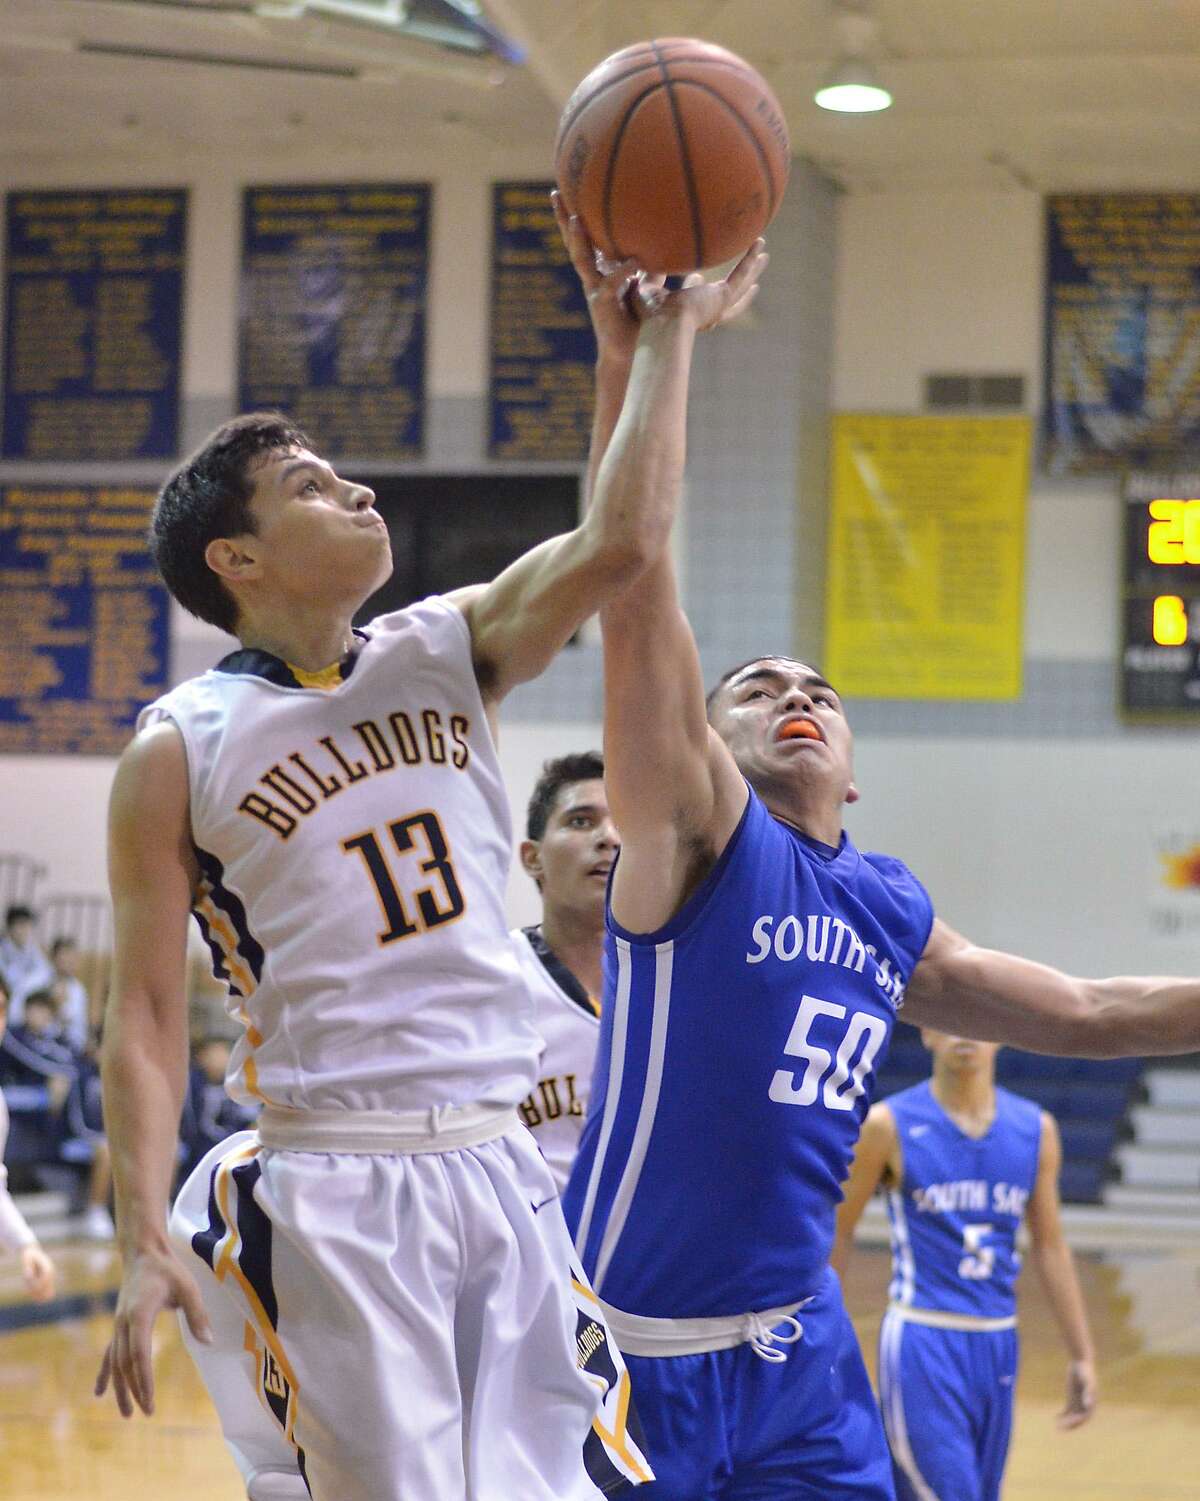 Devin Rodriguez led the way with 19 points Friday as Alexander won 72-68 in overtime at Eagle Pass.